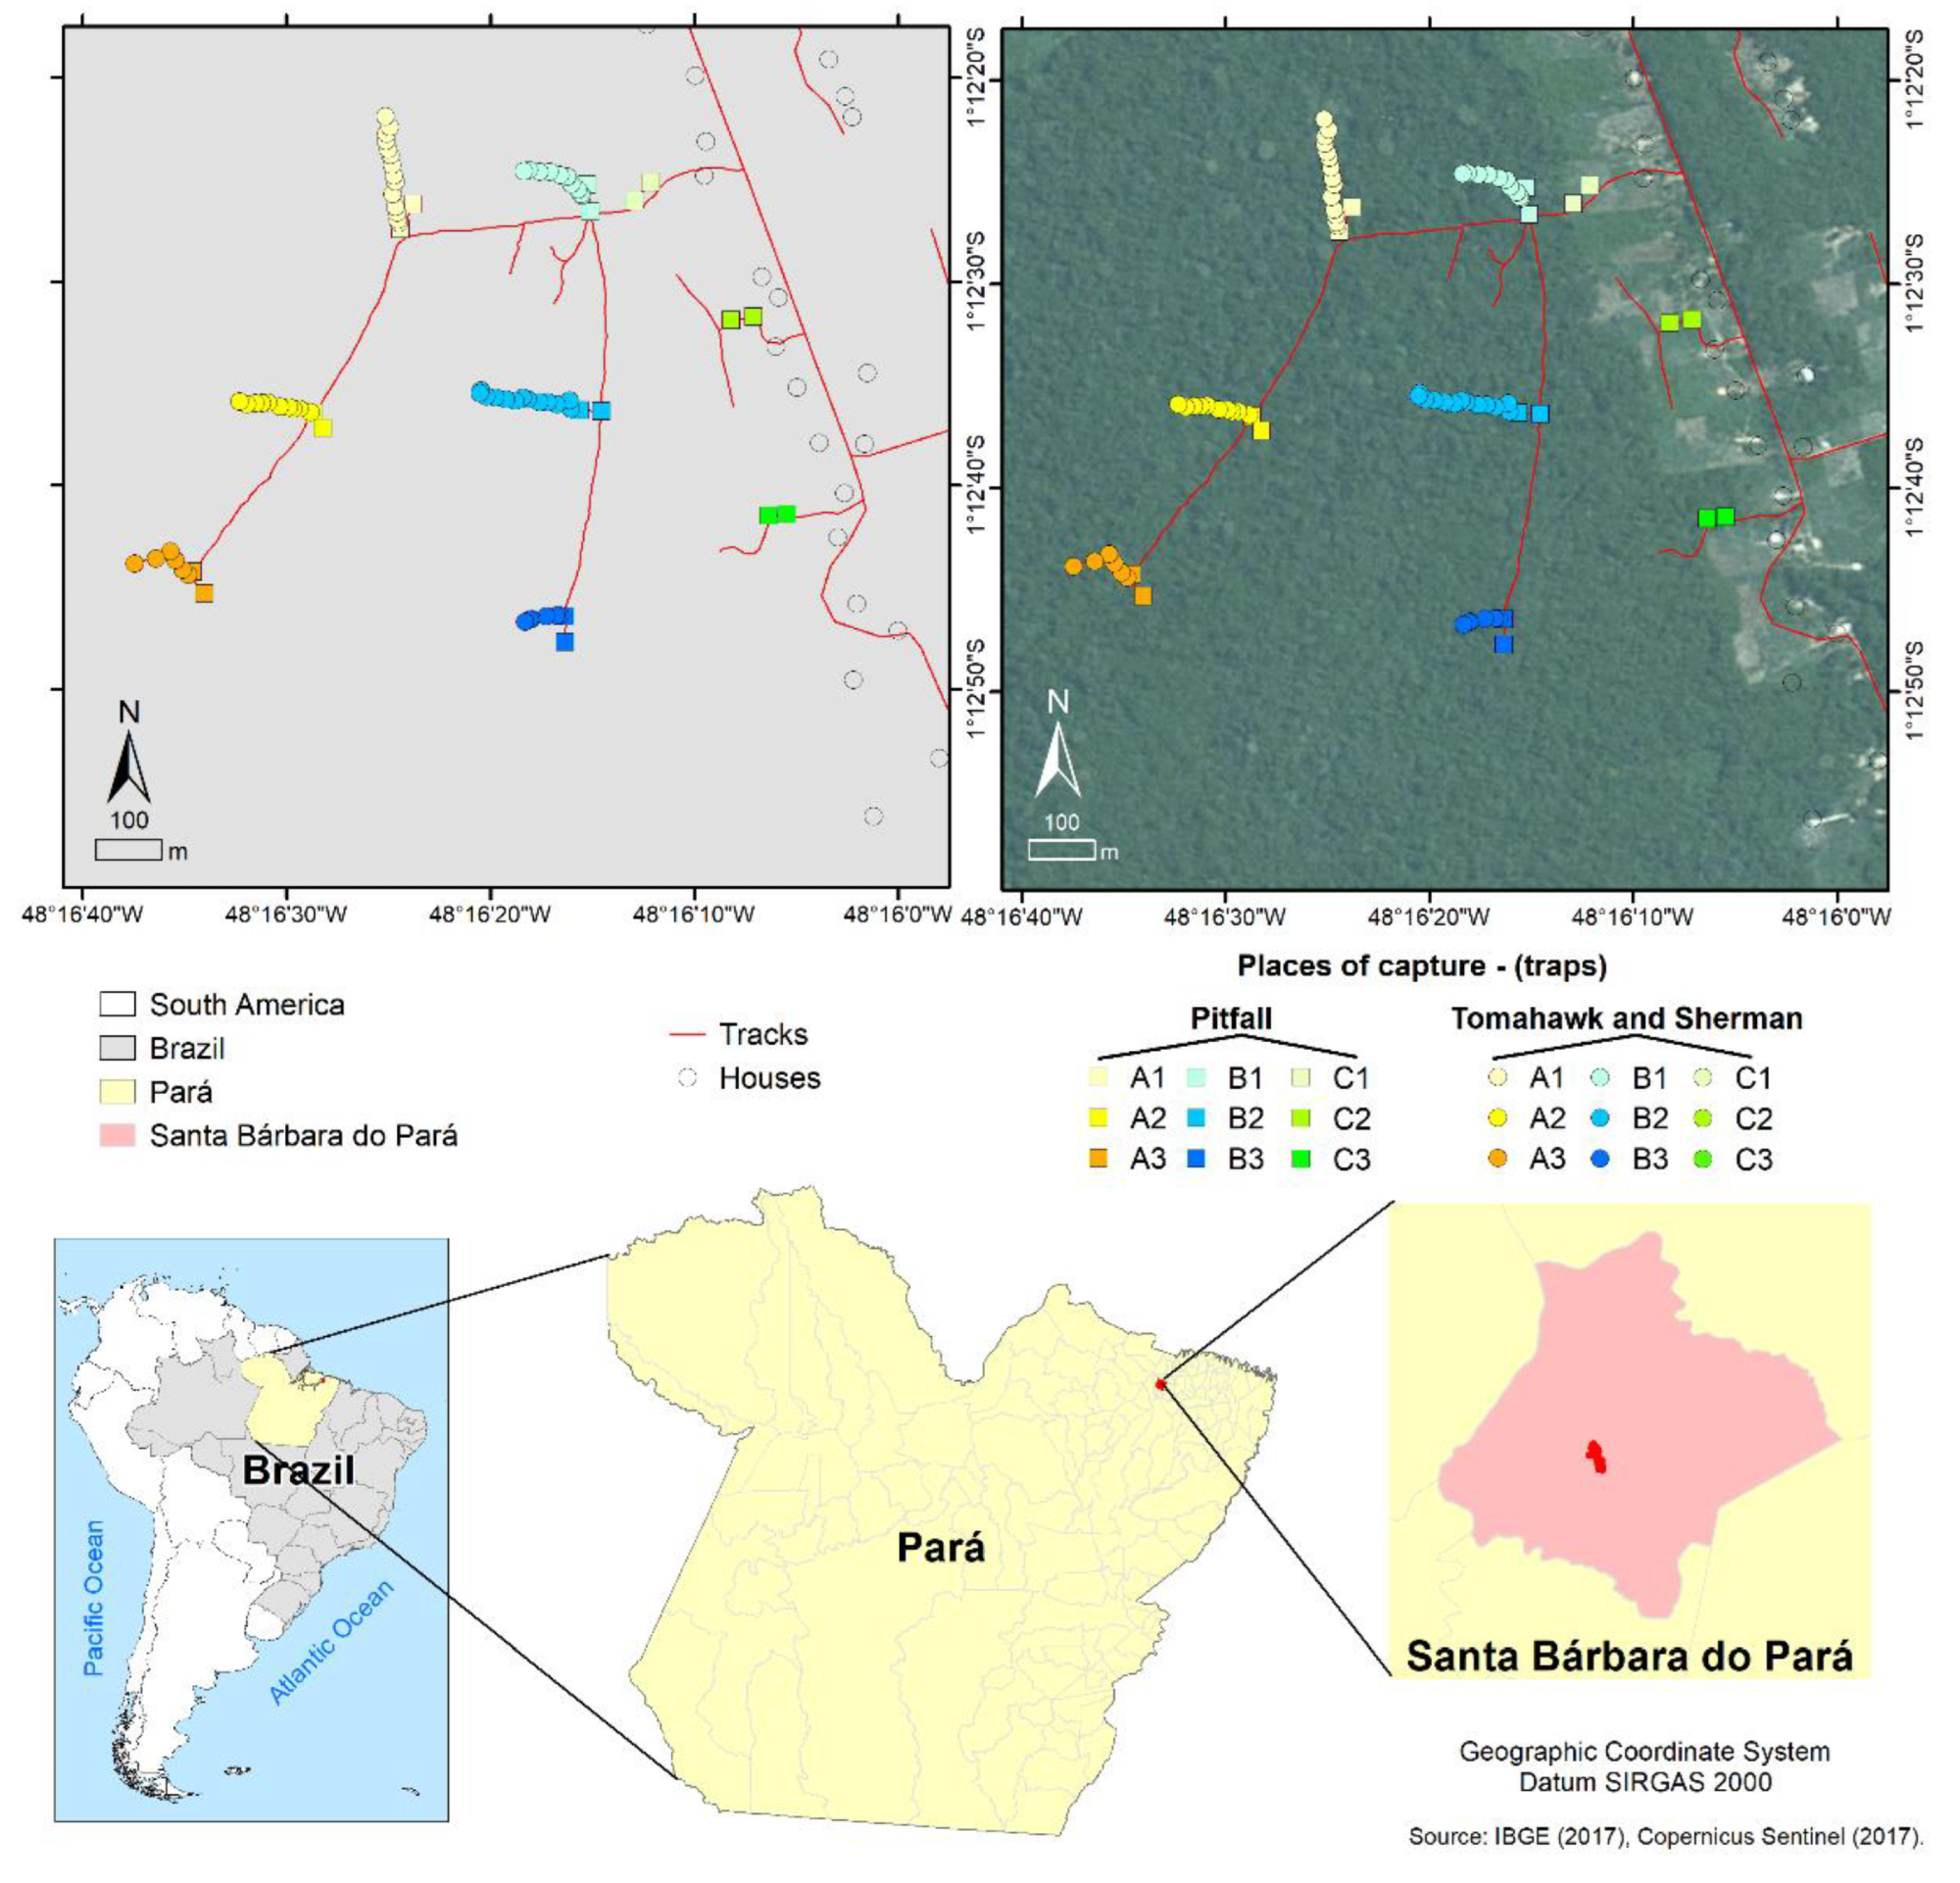 Map of the collection area in the Expedito Ribeiro village in Santa Bárbara do Pará municipality (Pará state, Brazil) and its location in the Brazilian territory. Traps were placed in the open field surrounding the human habitations (A1–A3), the forest fragment border (B1–B3), and its most interior region (C1–C3). The IBGE (2017) and Copernicus Sentinel (2017) databases were consulted to prepare the maps.